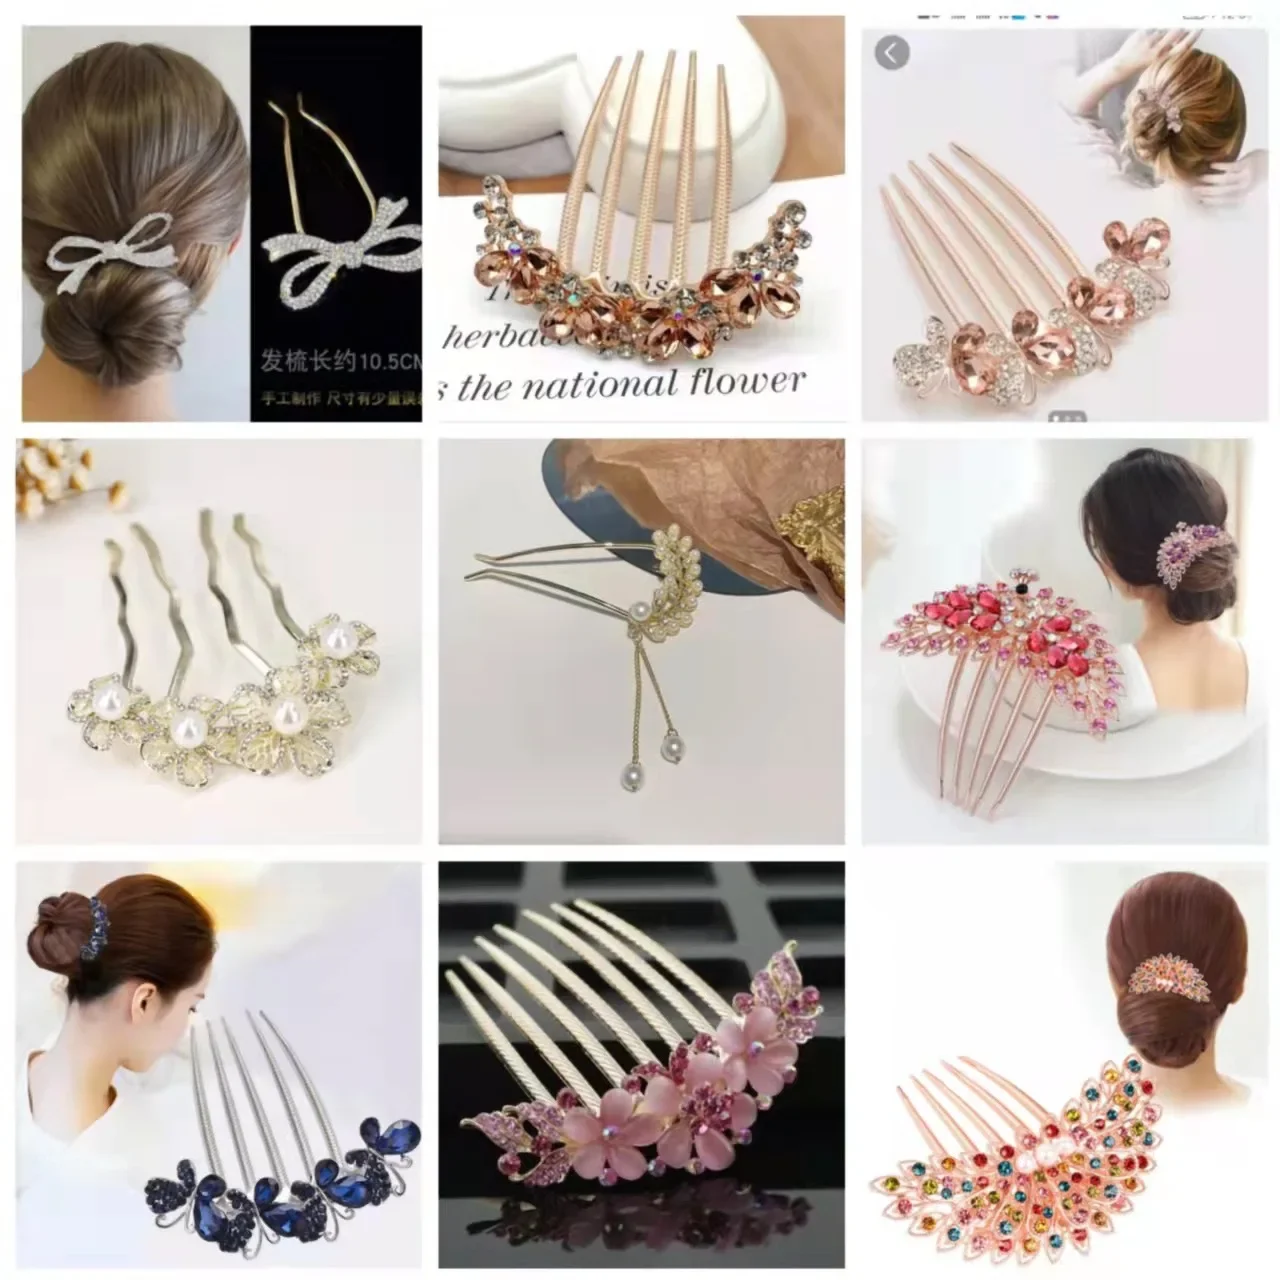 

New Korean style hair accessories inserted comb hair comb Rhinestone wreath headdress adult hairpin butterfly curler headware